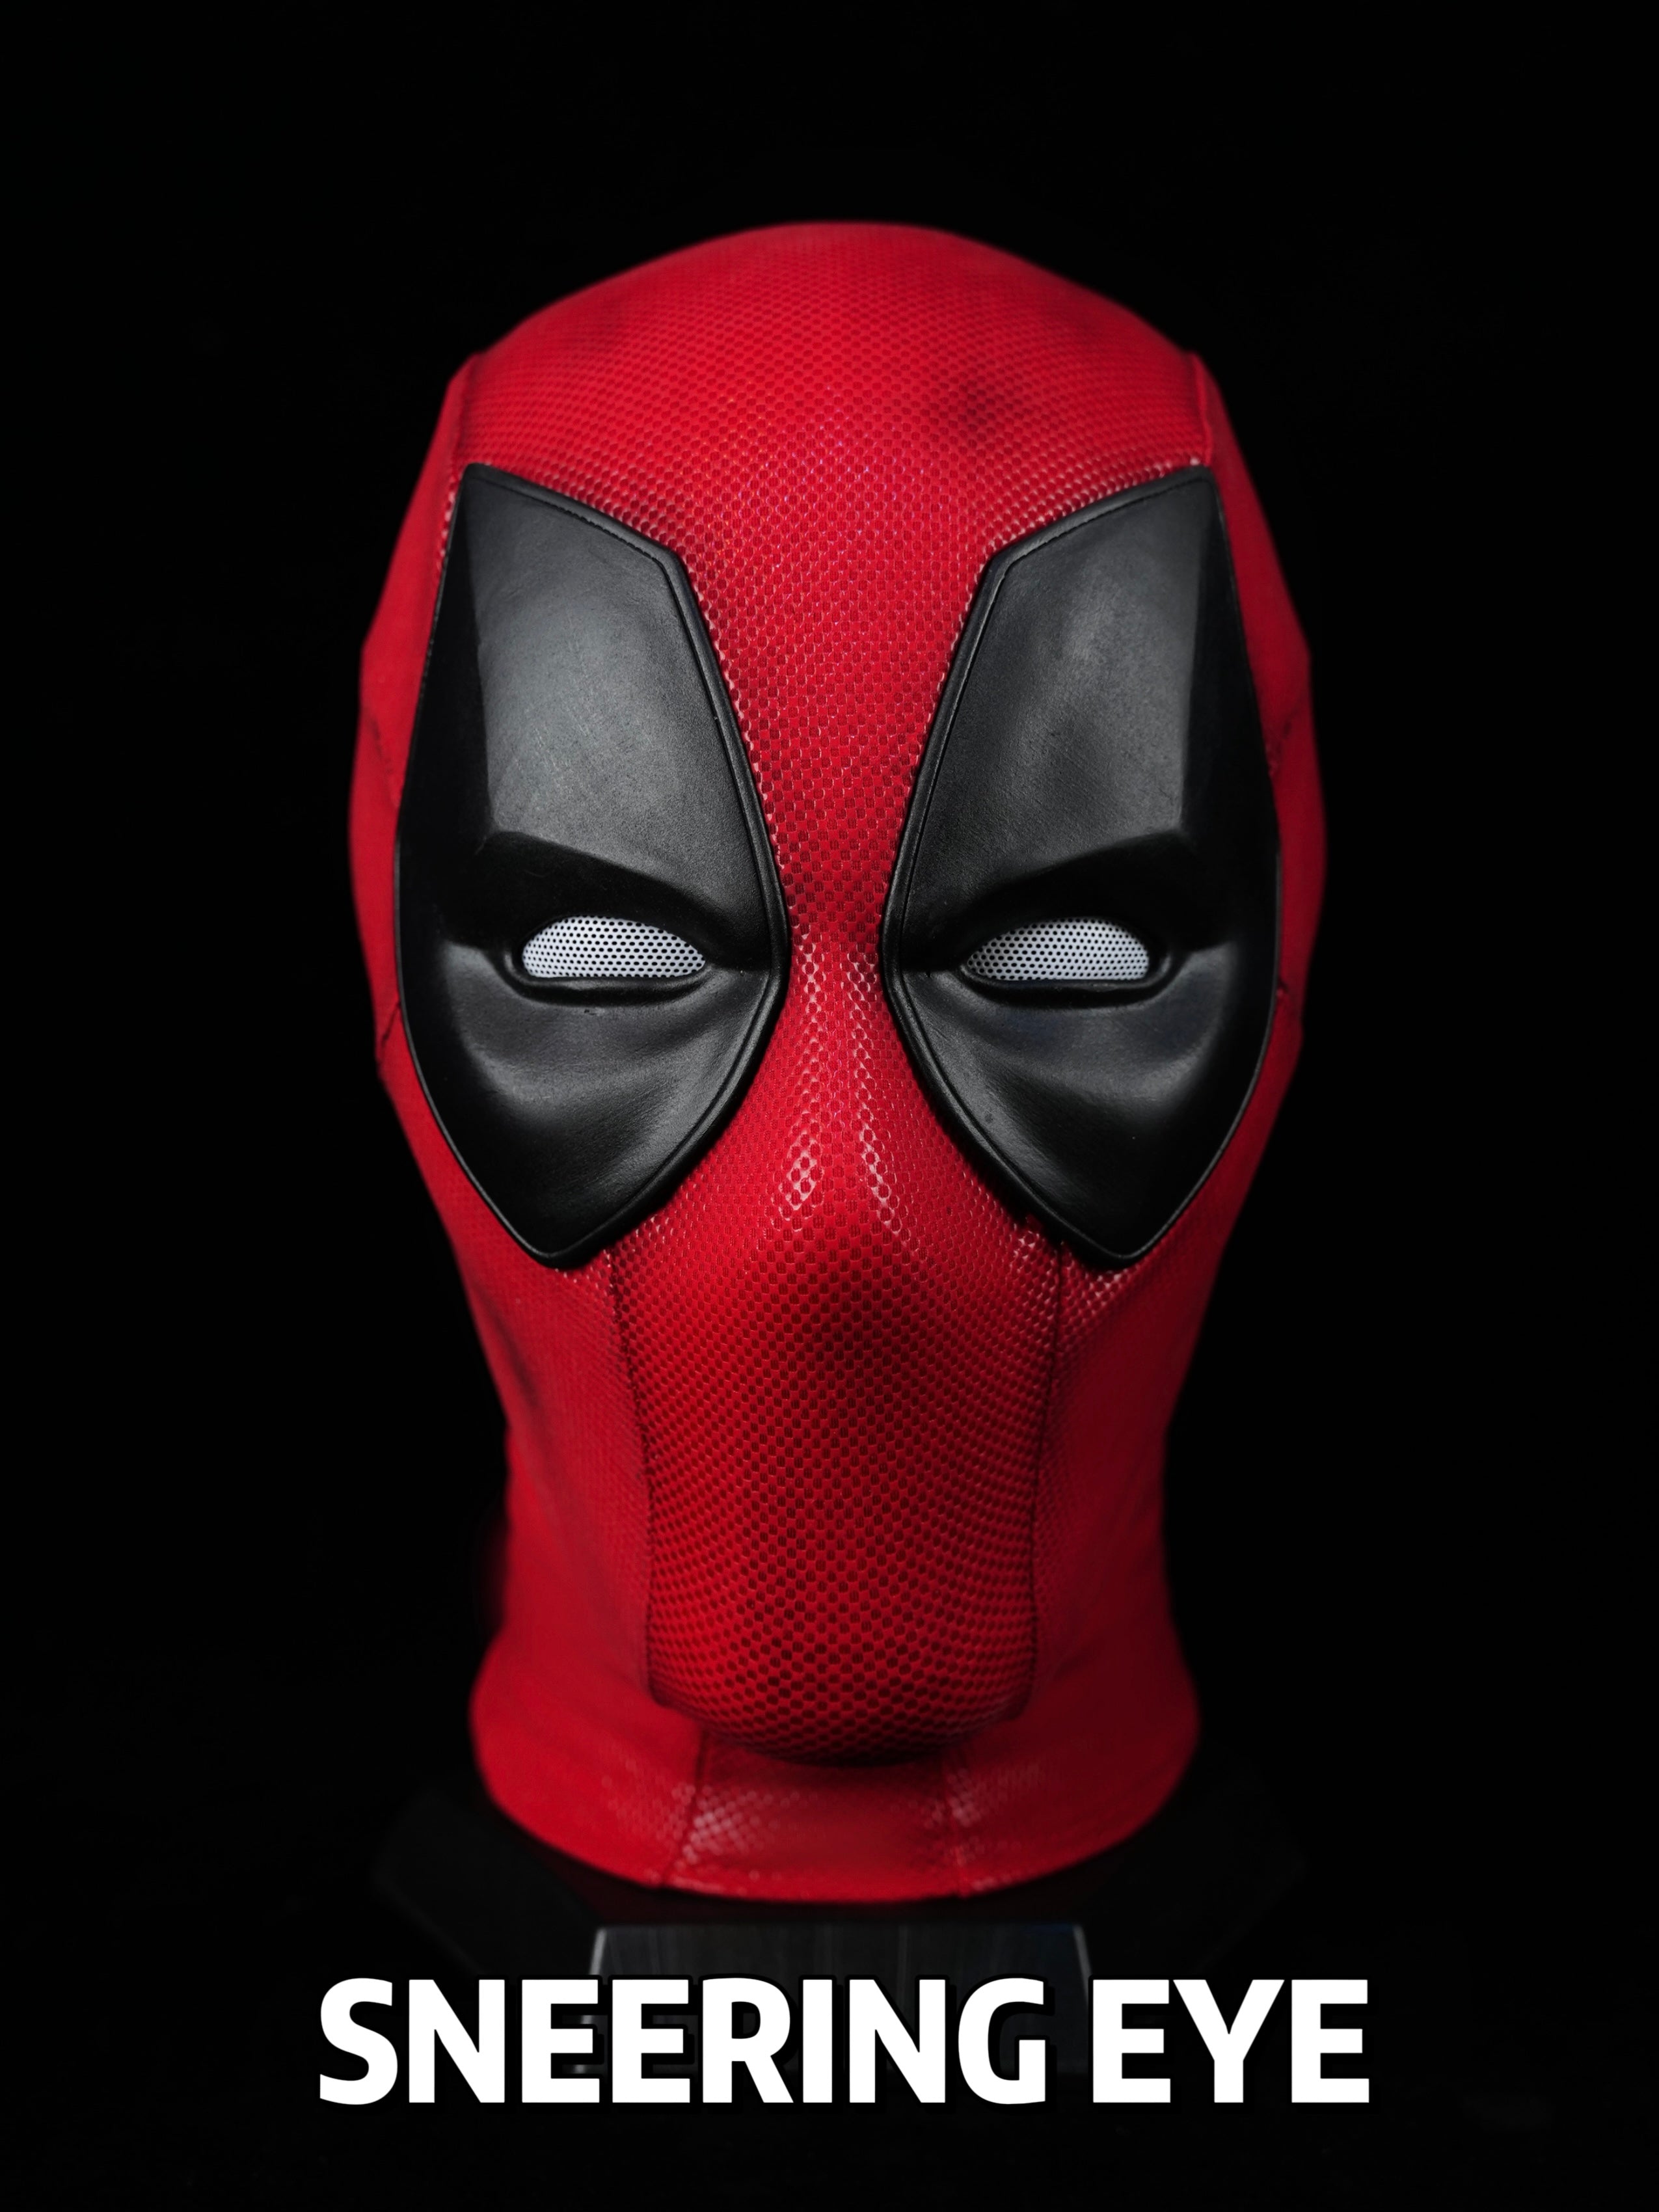 Dead pool mask with Faceshell Wearable Movie Prop Replica (Adult)